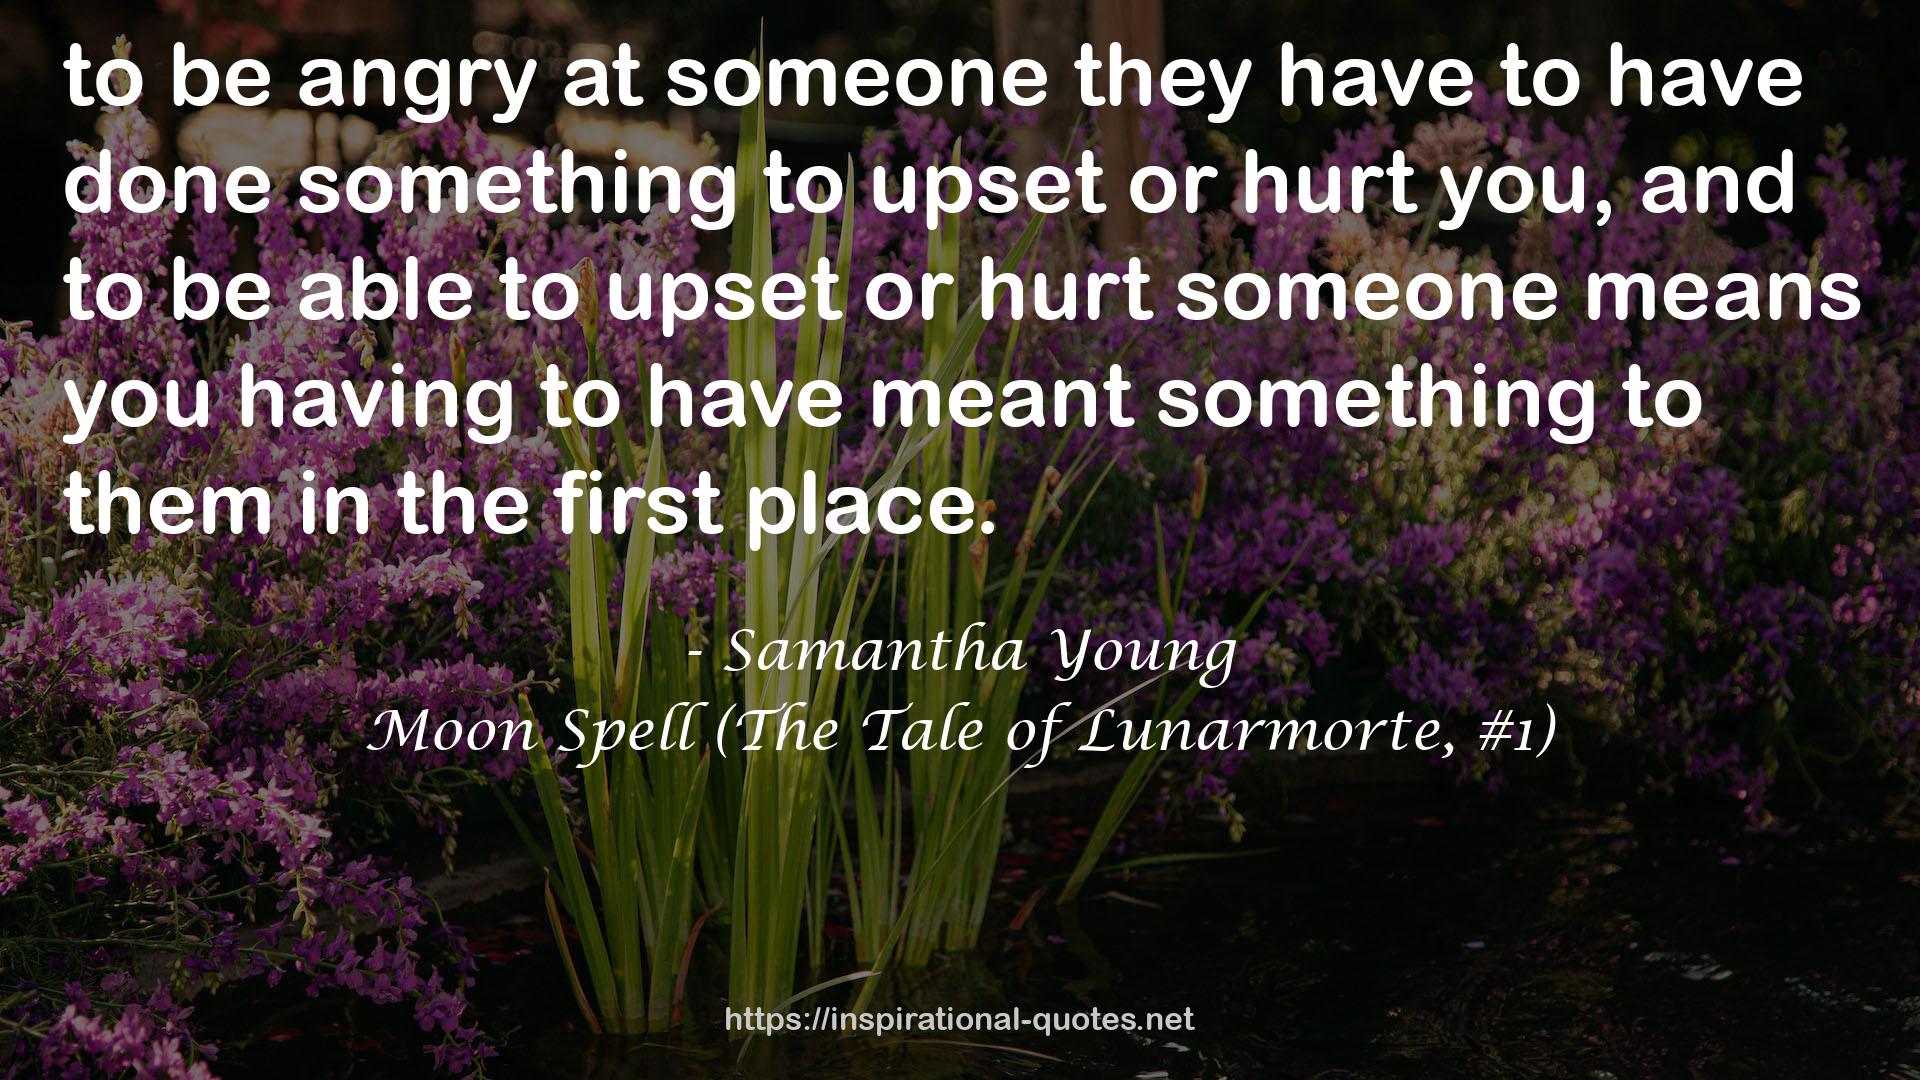 Moon Spell (The Tale of Lunarmorte, #1) QUOTES